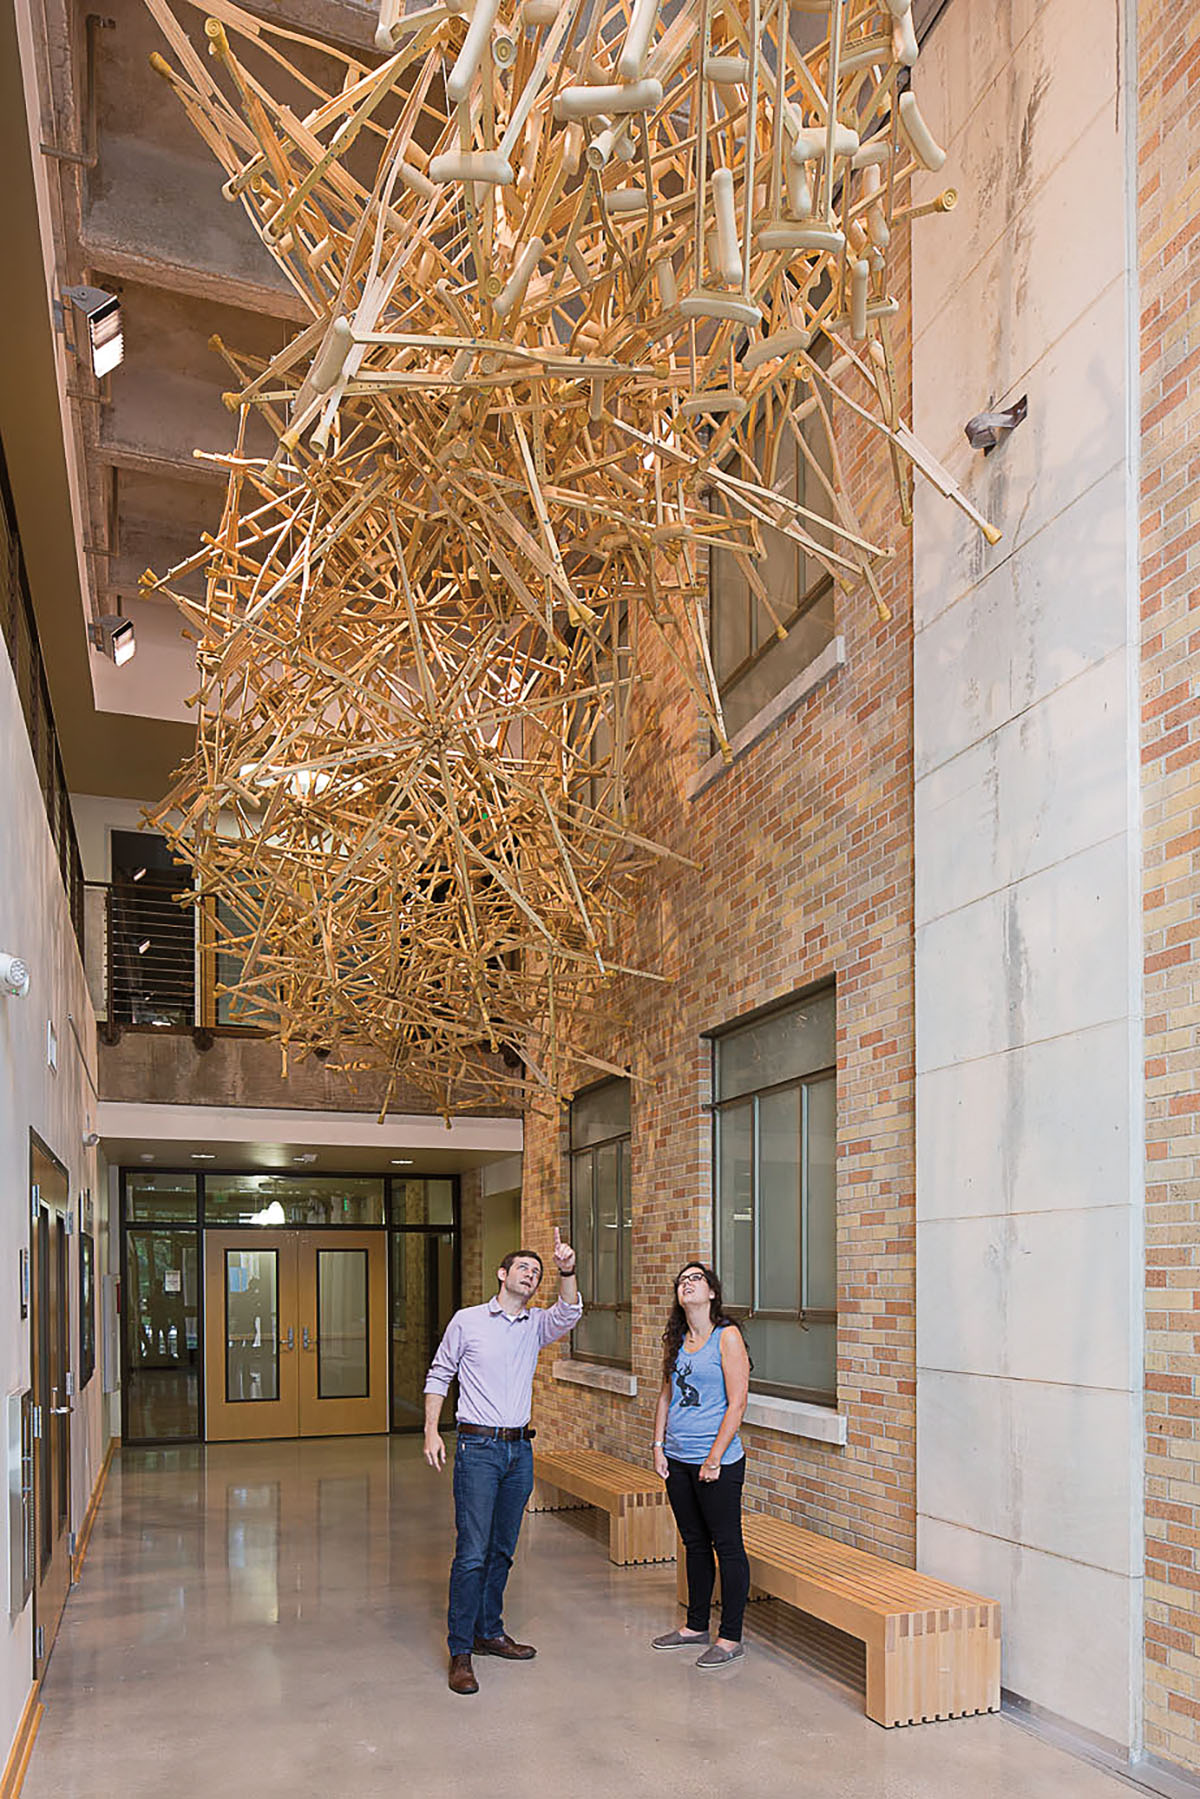 Two people stand in a hallway underneath a large and spindly sculpture made of wood